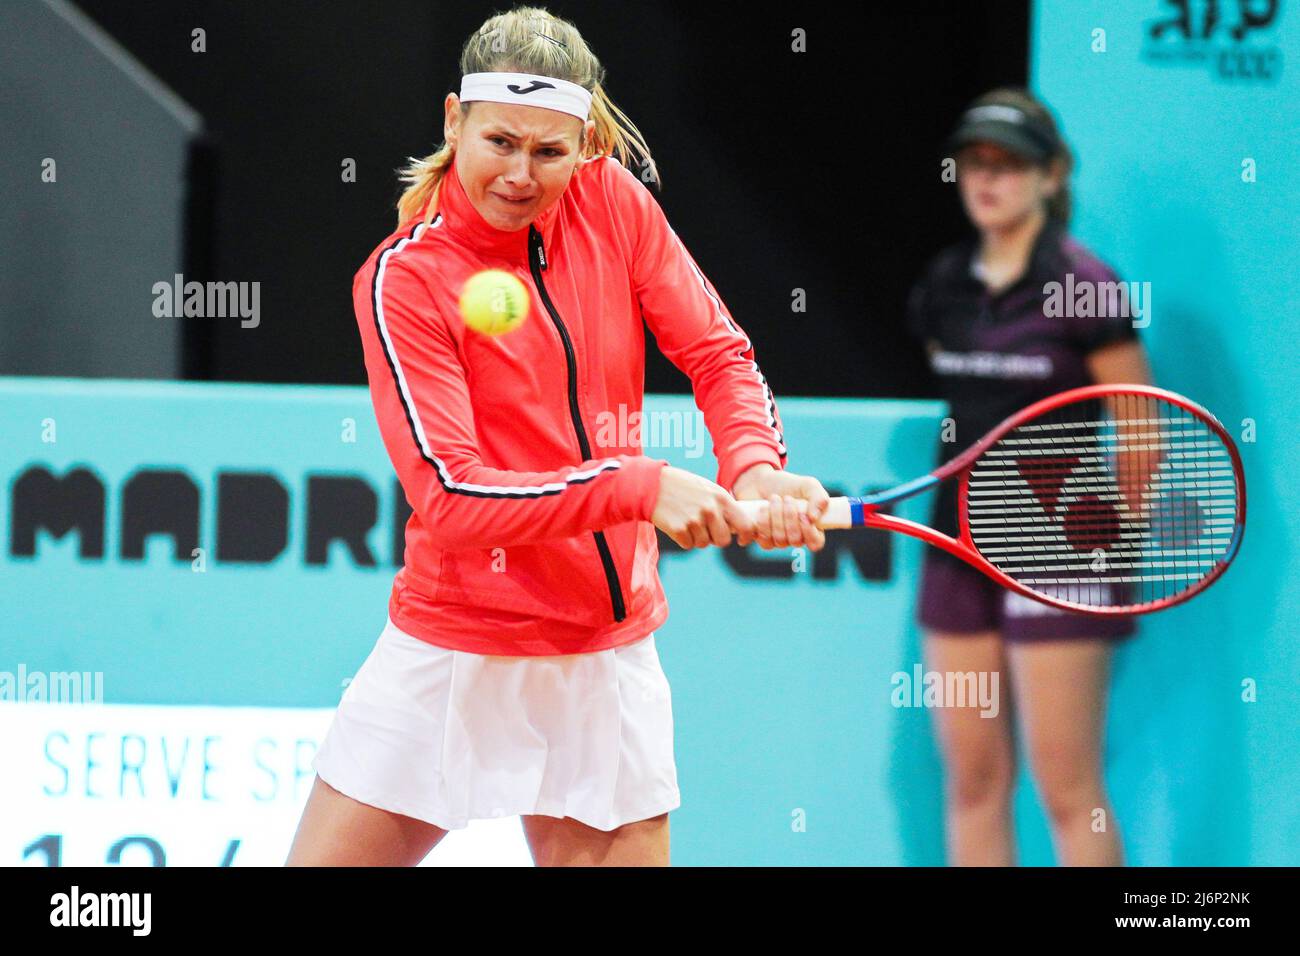 May 2, 2022, Madrid, Spain: Marie Bouzkova from Czech Republic in action  against Ekaterina Alexandrova from Russia during the Mutua Madrid Open 2022  tennis tournament on May 2, 2022 at Caja Magica